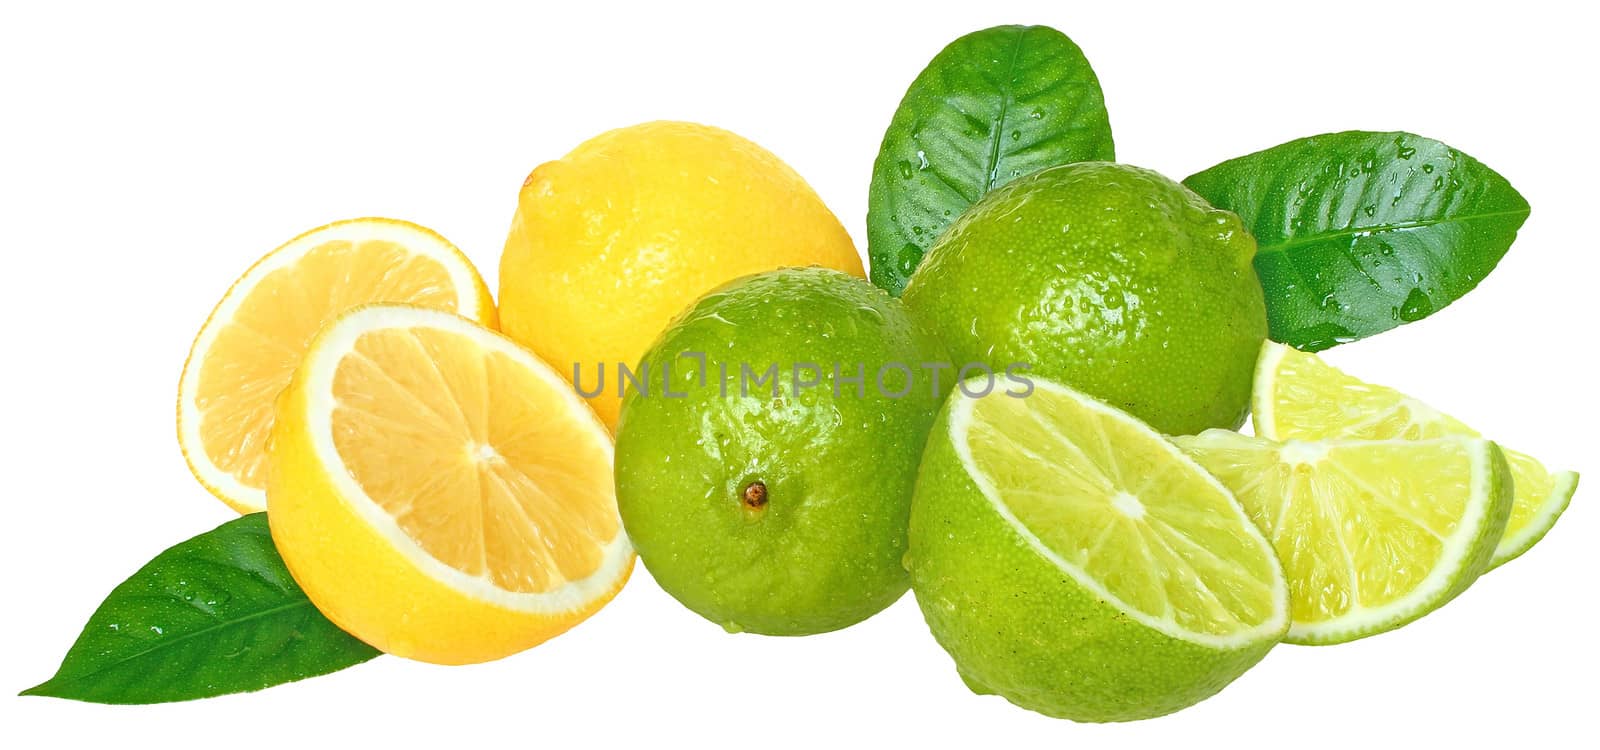 Fresh limes and lemons on a white background.